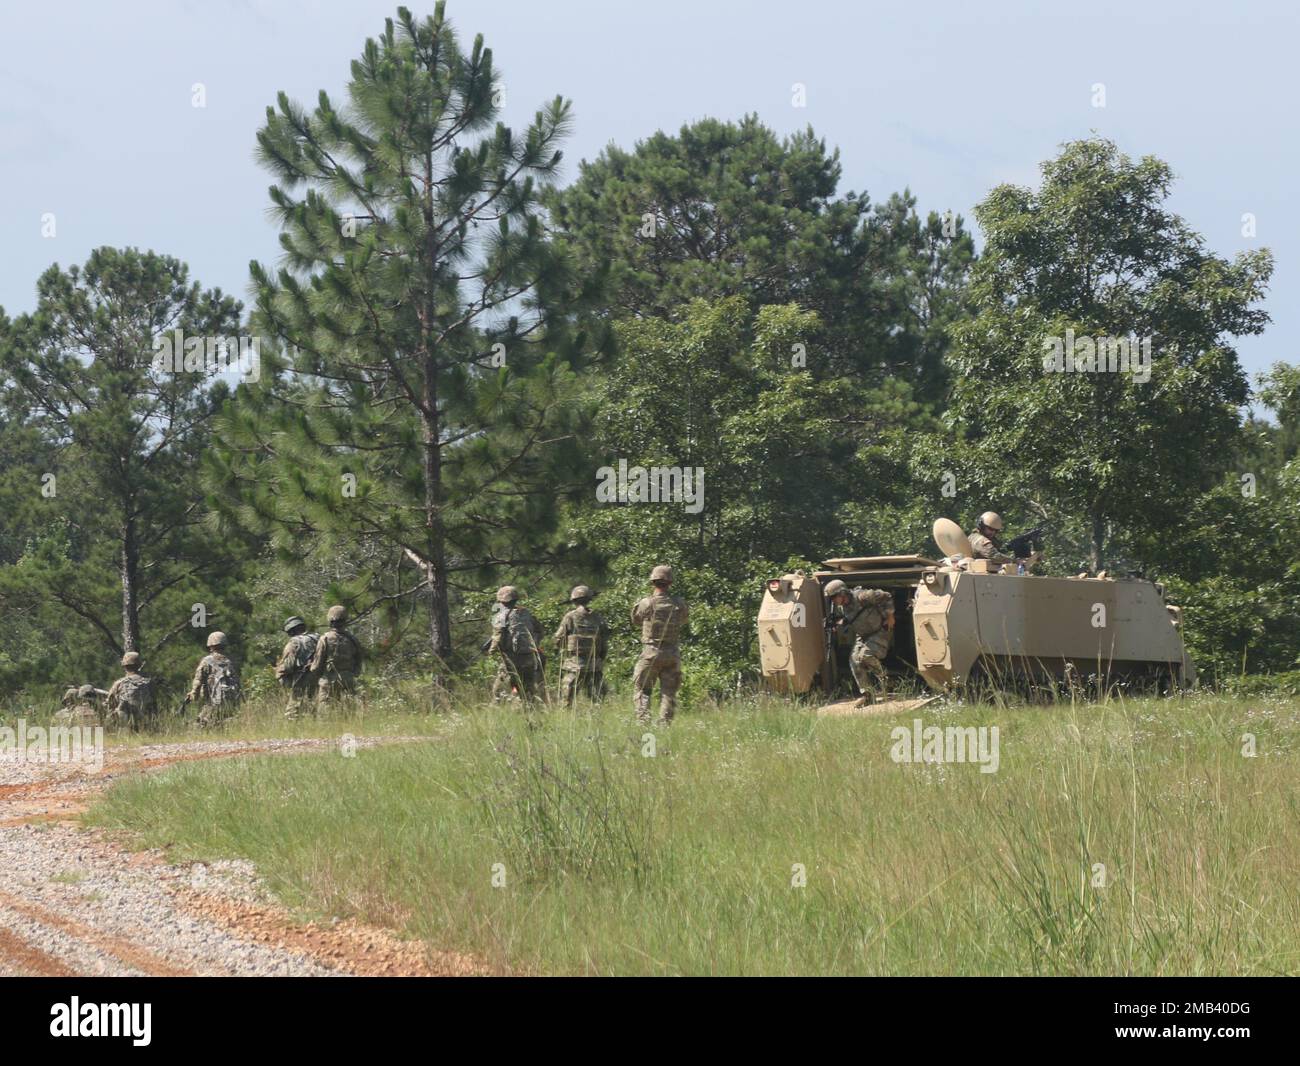 Soldiers with the 287th Engineer Company, 168th Engineer Brigade, 184th Sustainment Command, recently conducted field demolition training at Camp Shelby Joint Forces Training Center in Hattiesburg, Mississippi, on June 11, 2022. The training allows the engineers to fulfill expected tasks of their profession. Stock Photo